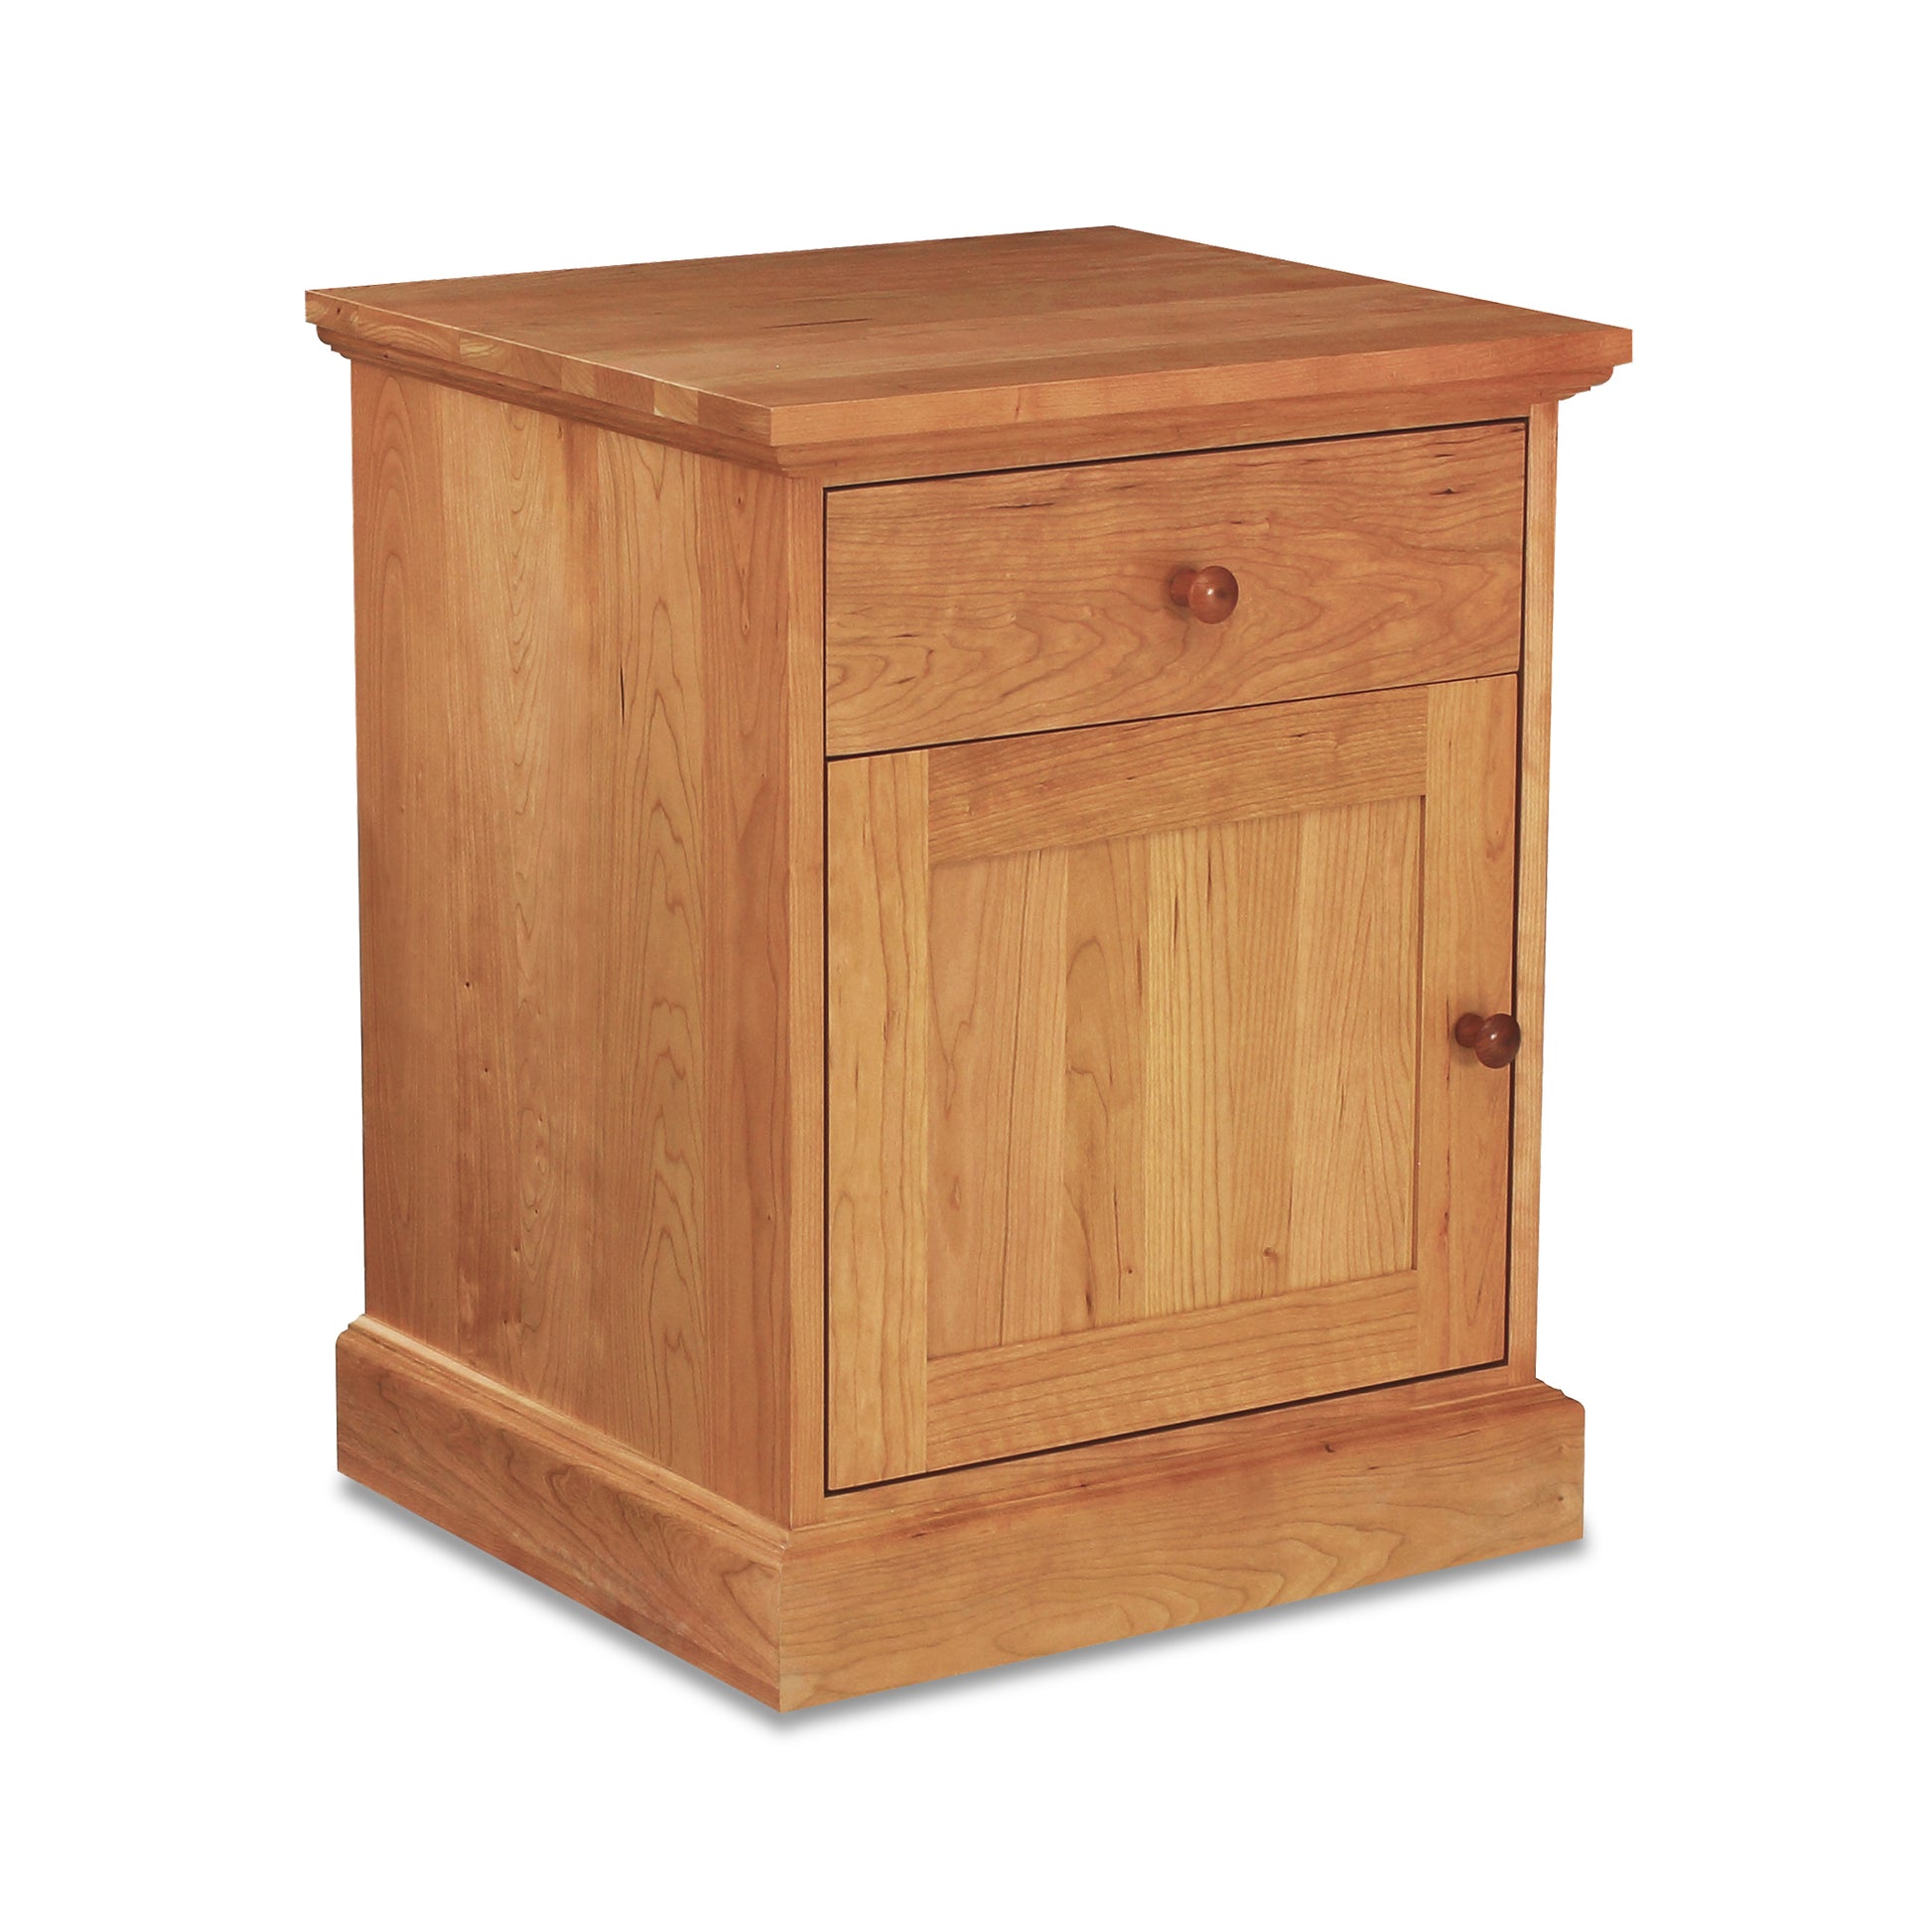 A small Lyndon Furniture New England Shaker 1-Drawer Nightstand with Door made of hardwood cherry.